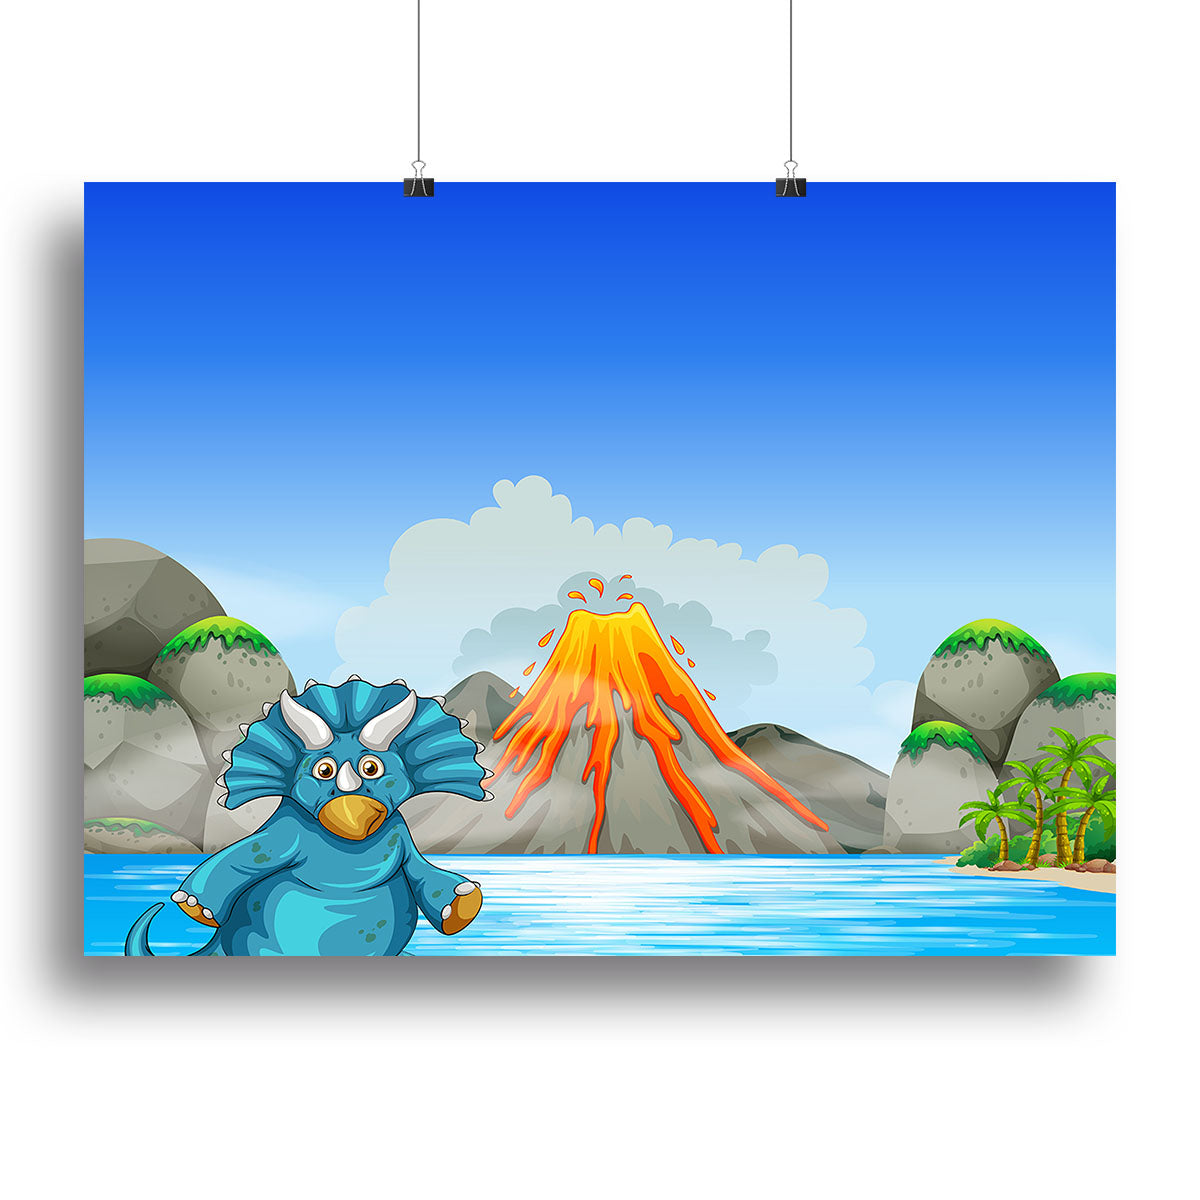 Dinosaur living by the lake Canvas Print or Poster - Canvas Art Rocks - 2